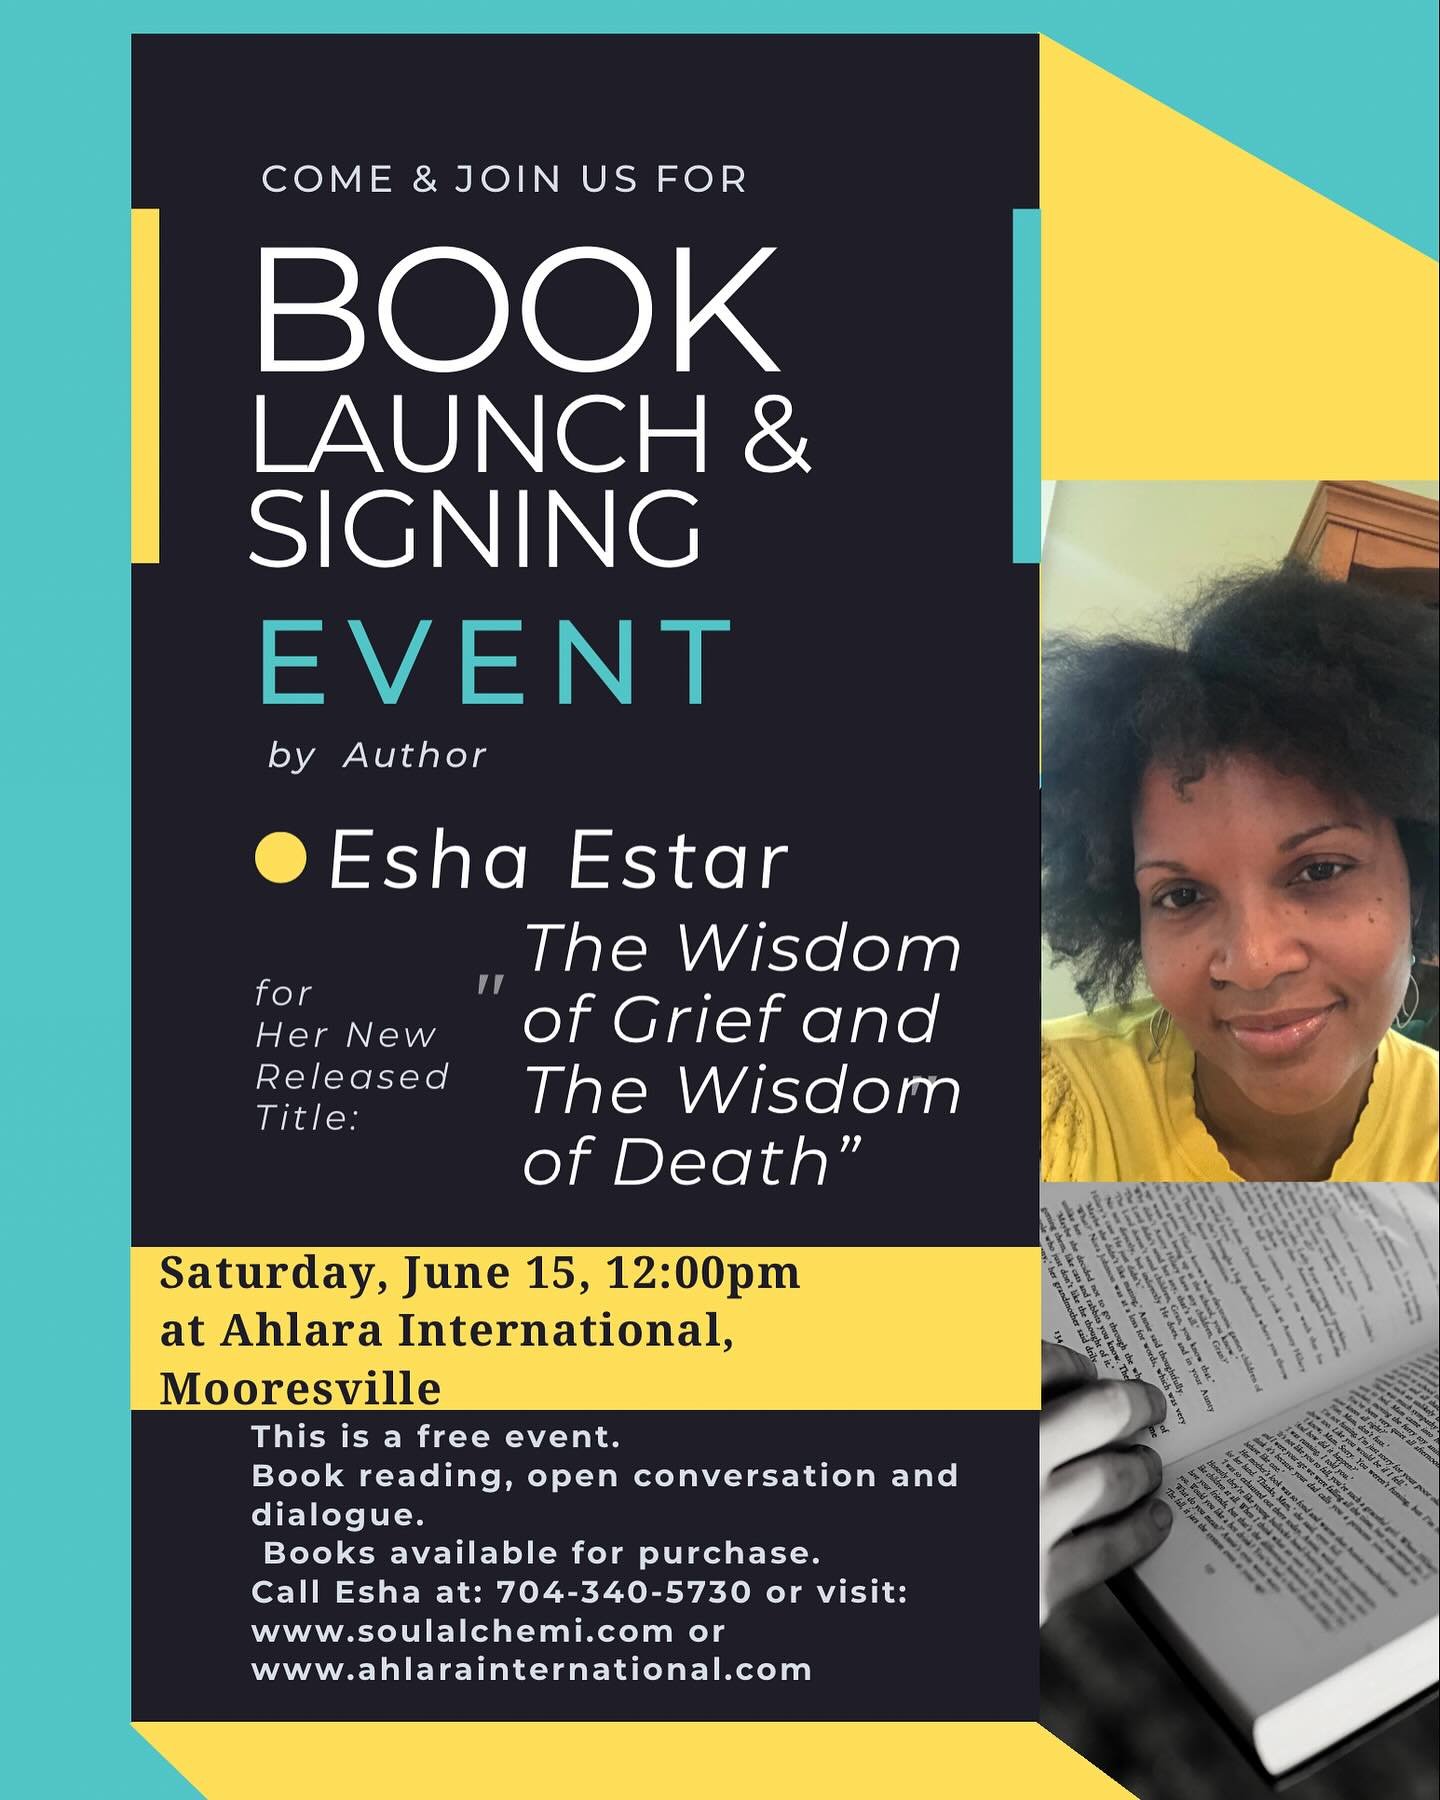 I&rsquo;m so excited to finally get a chance to do a book launch and signing. 

If you feel called to come sit with me in open conversation, dialogue about the things that scare us the most, death and grief, I&rsquo;d love to see you. 

In community 